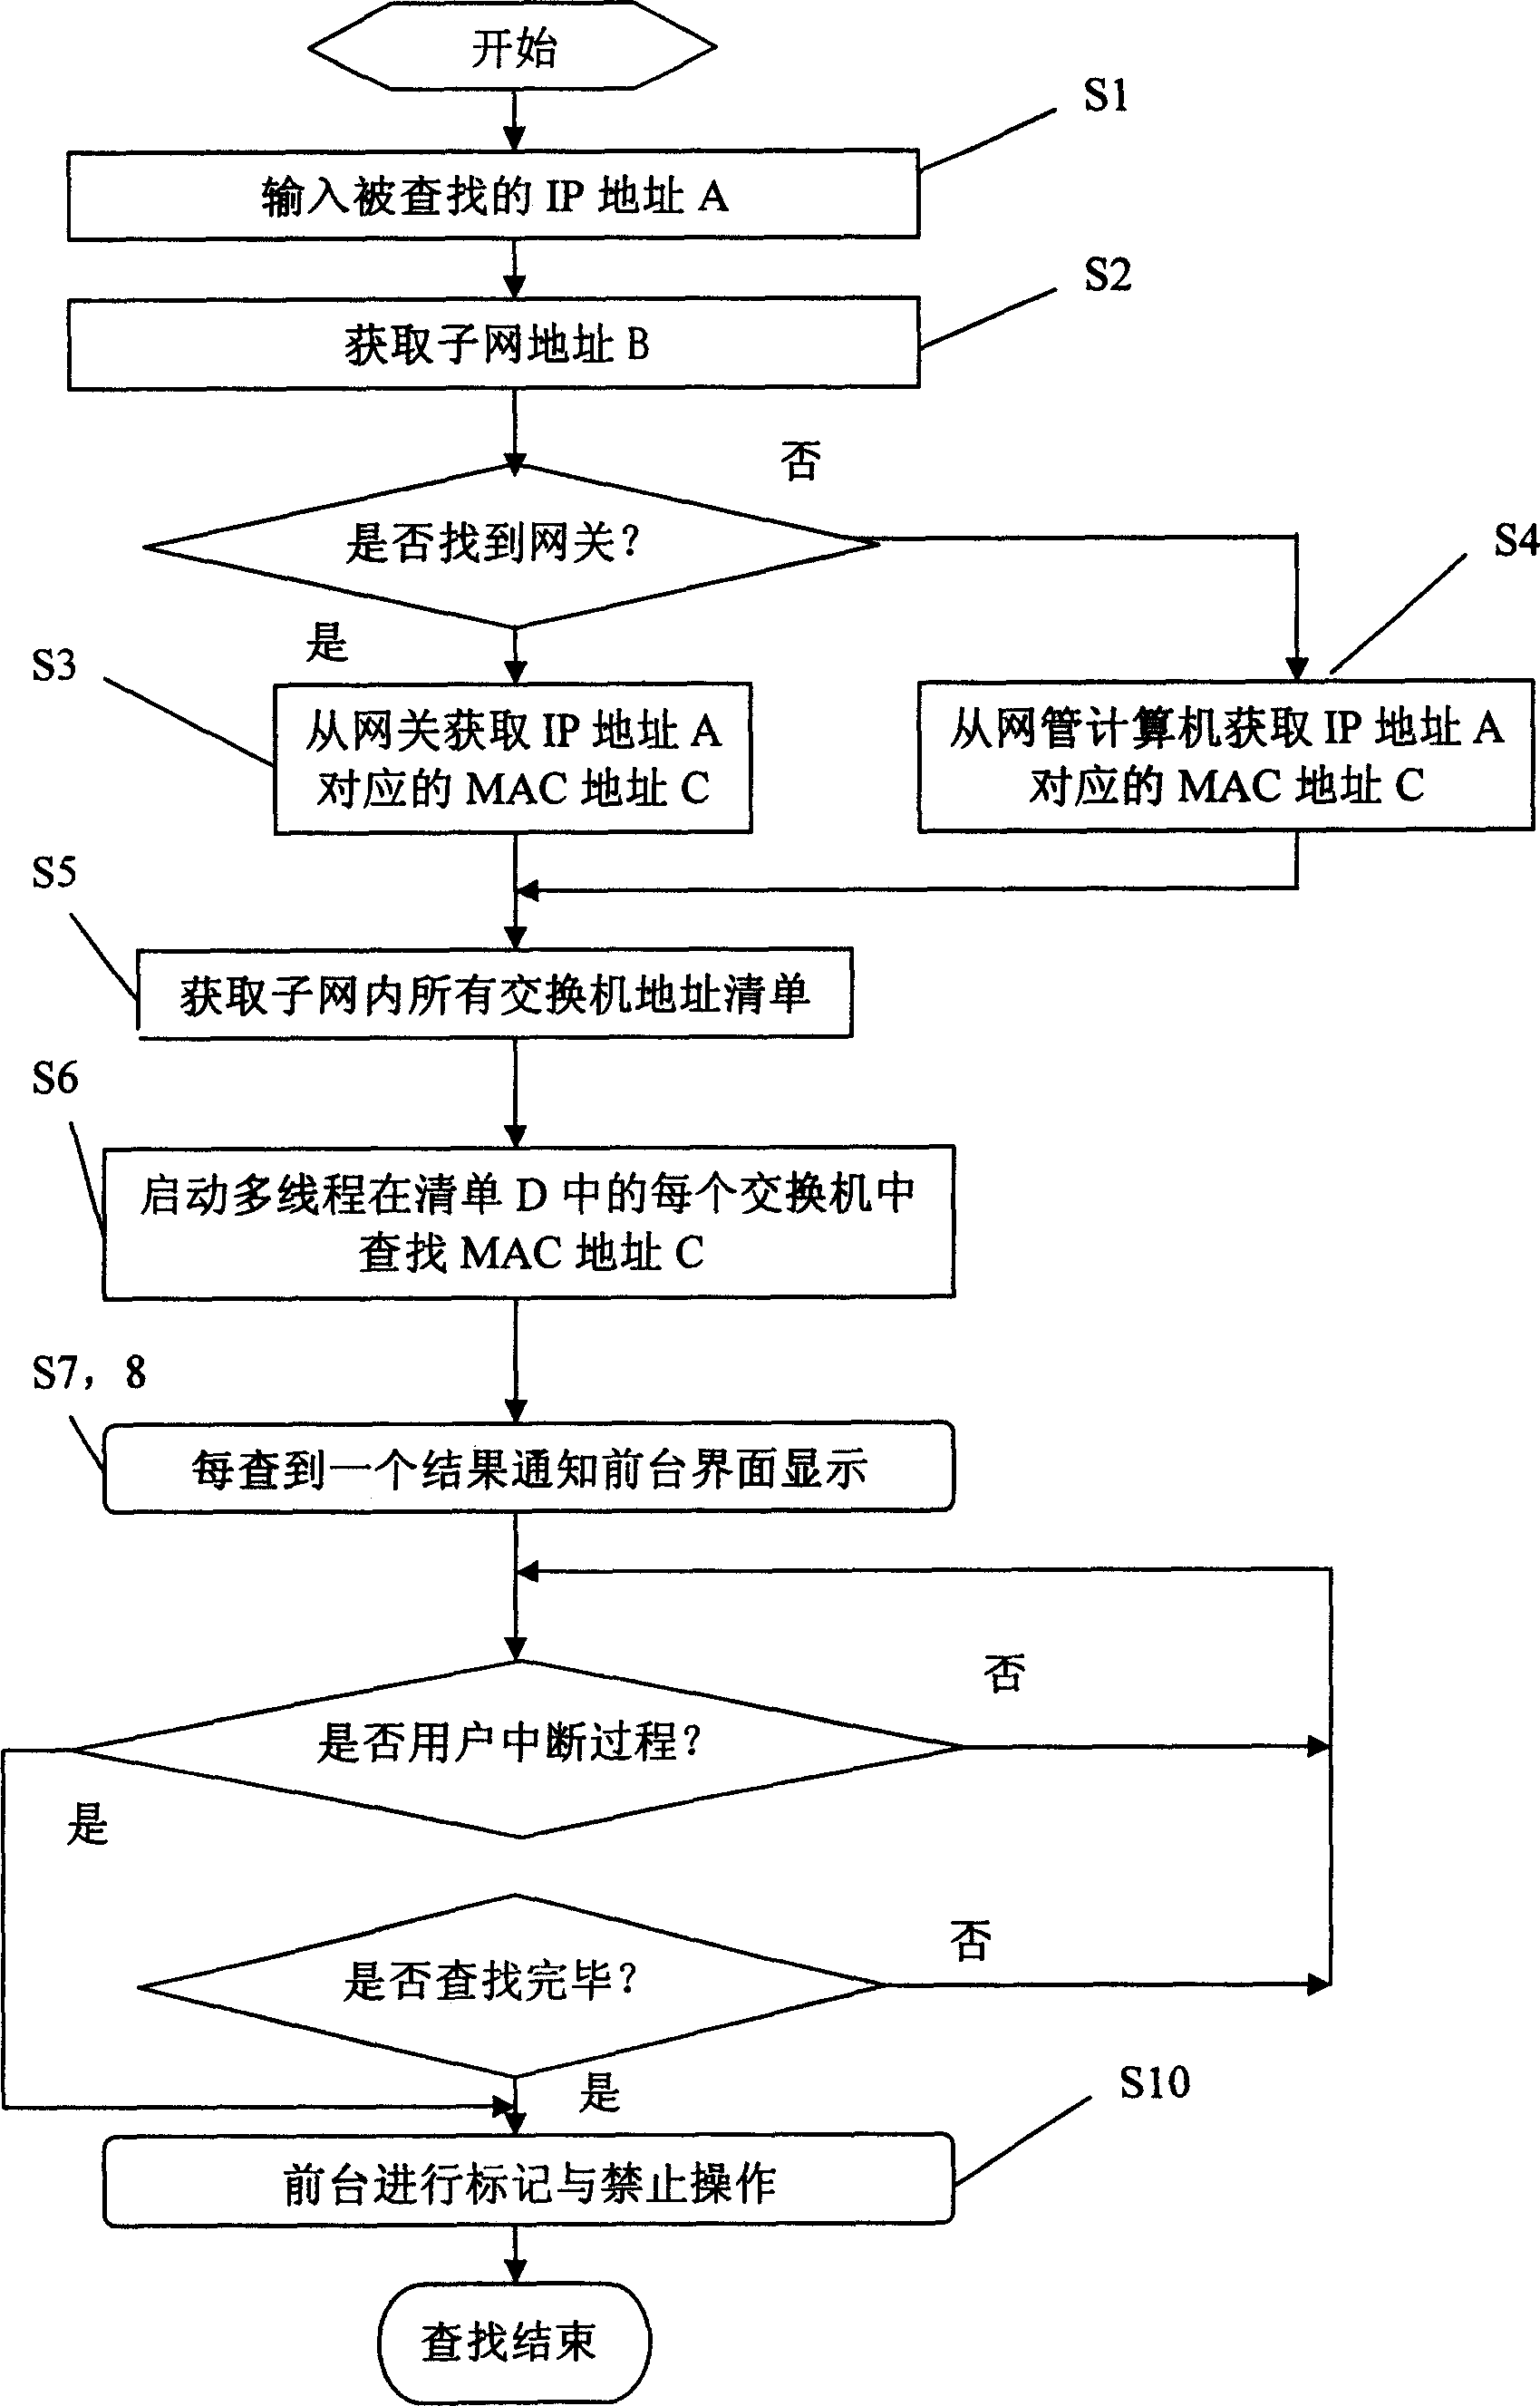 Method for high effectively searching network equipment address in network